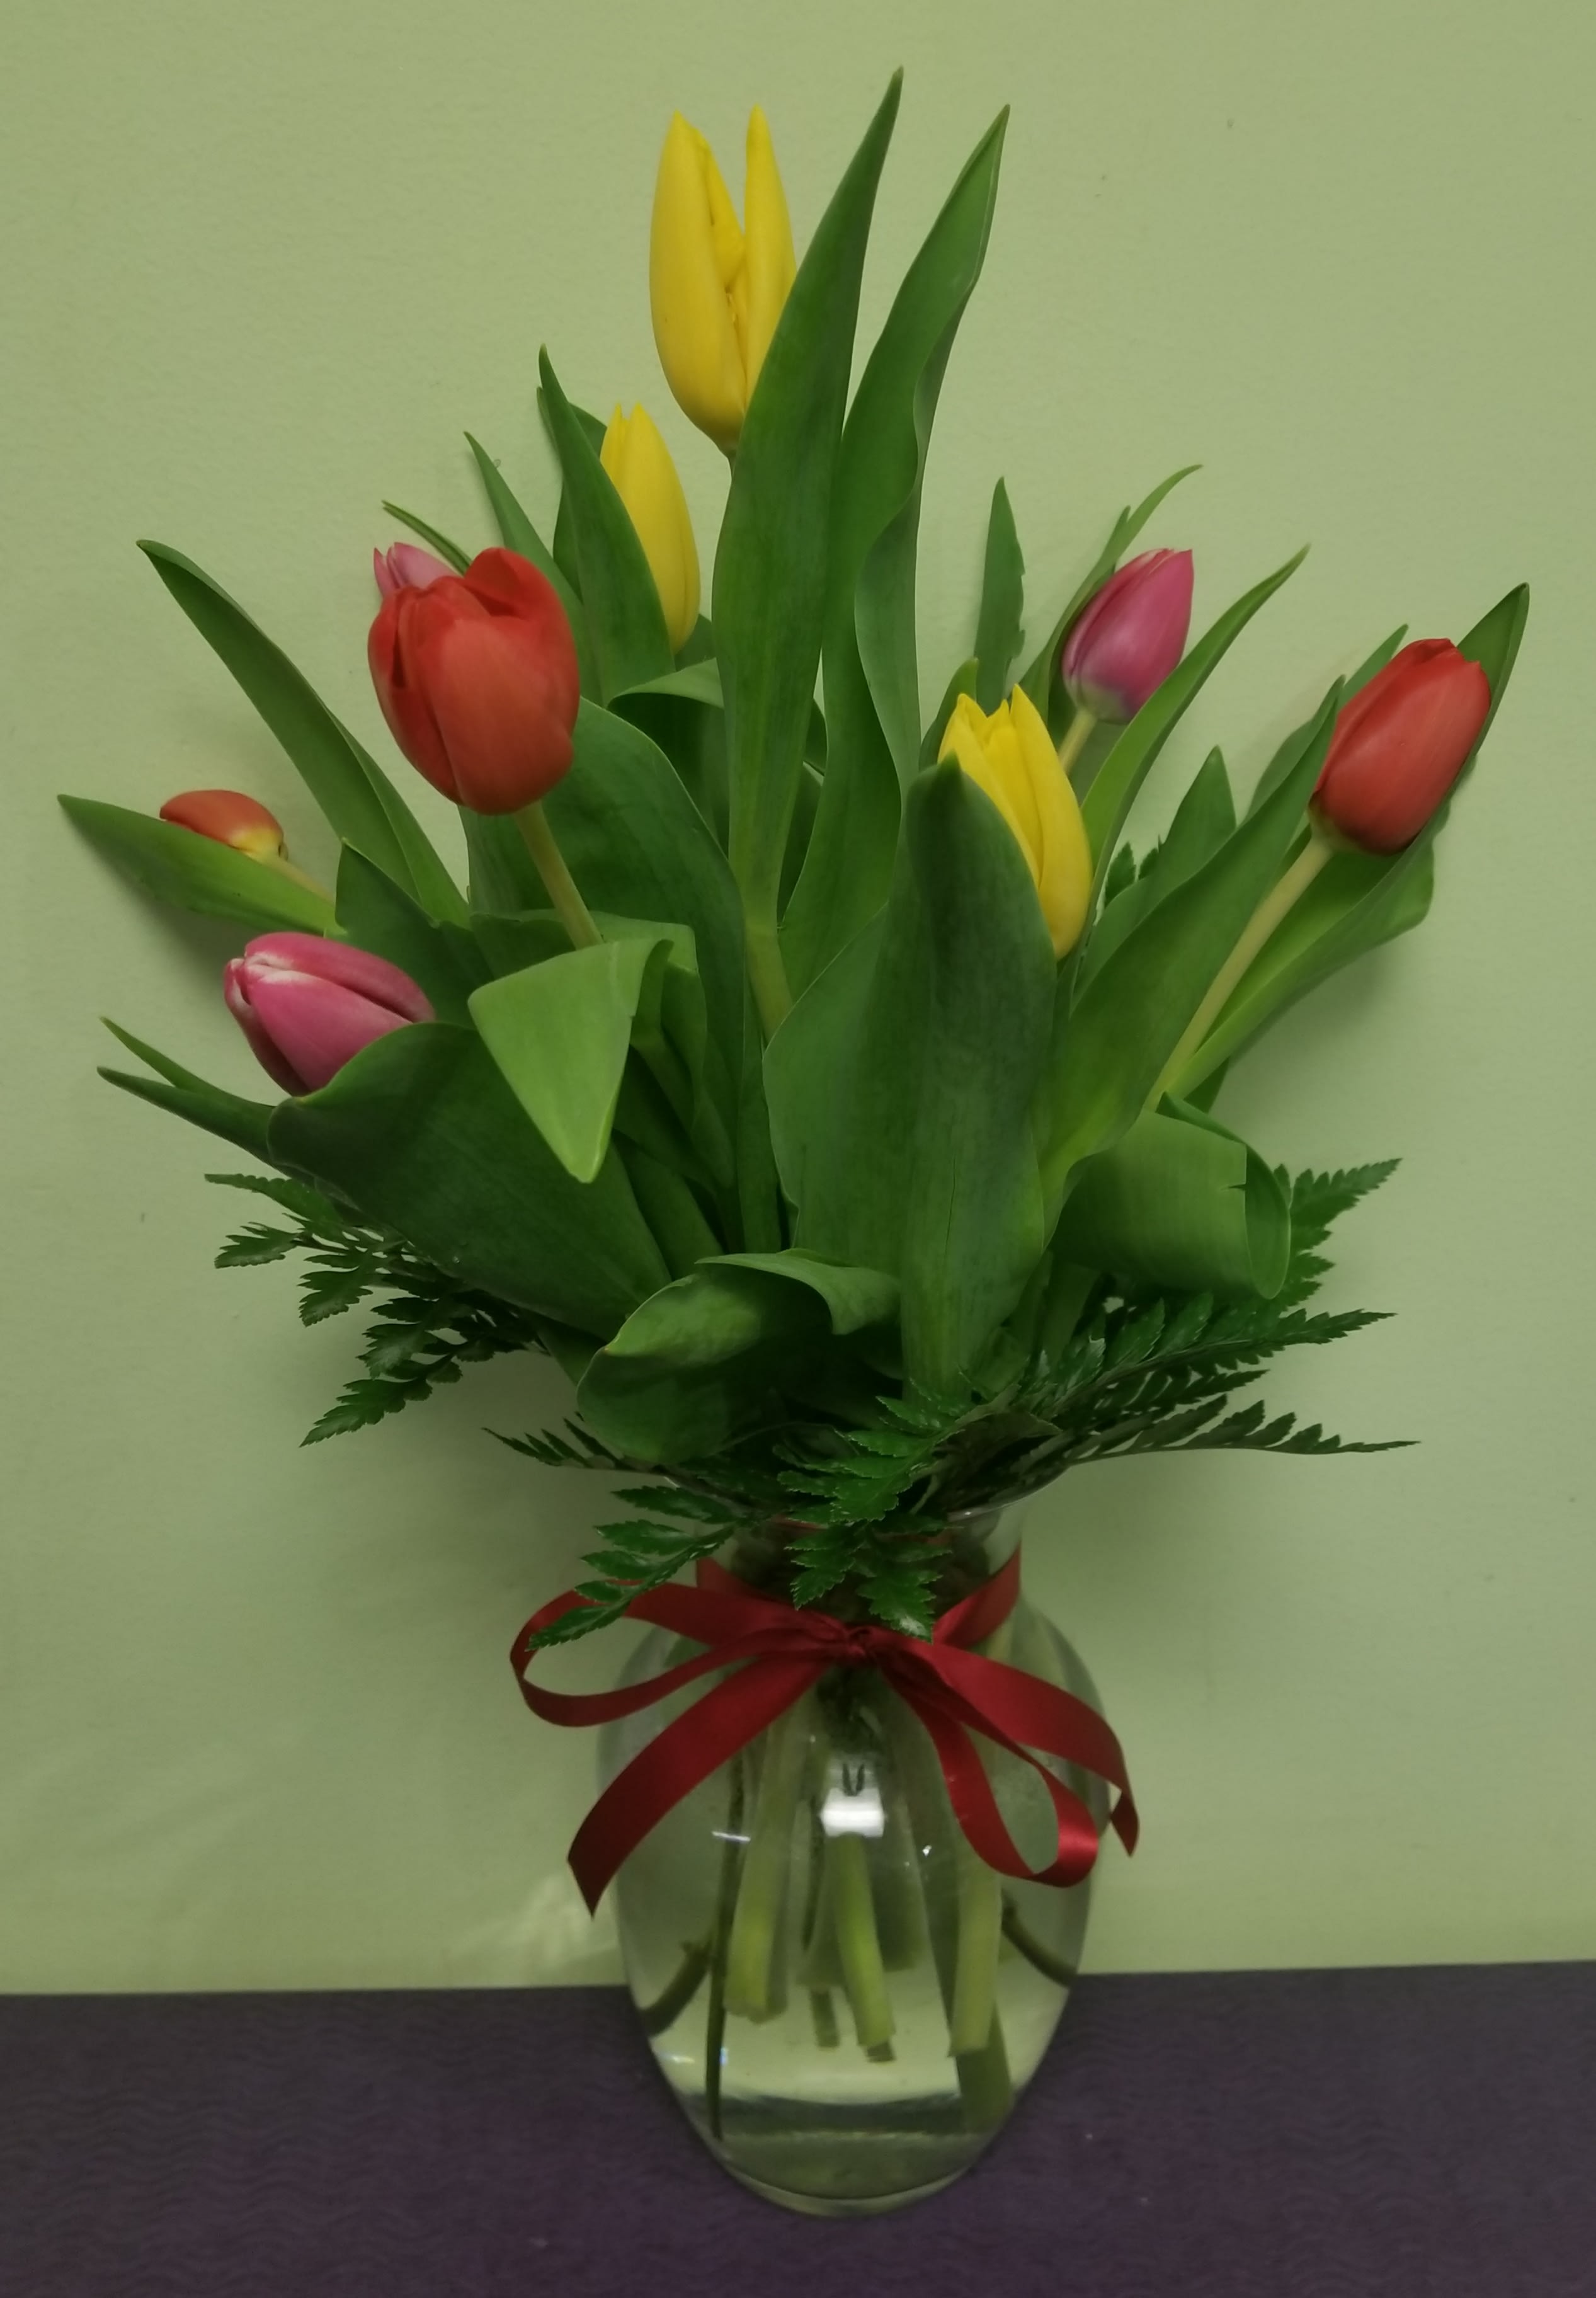 Assorted Tulips - This is the perfect Spring Arrangement. This is a beautiful mix of colorful tulips arranged in a perfect vase!